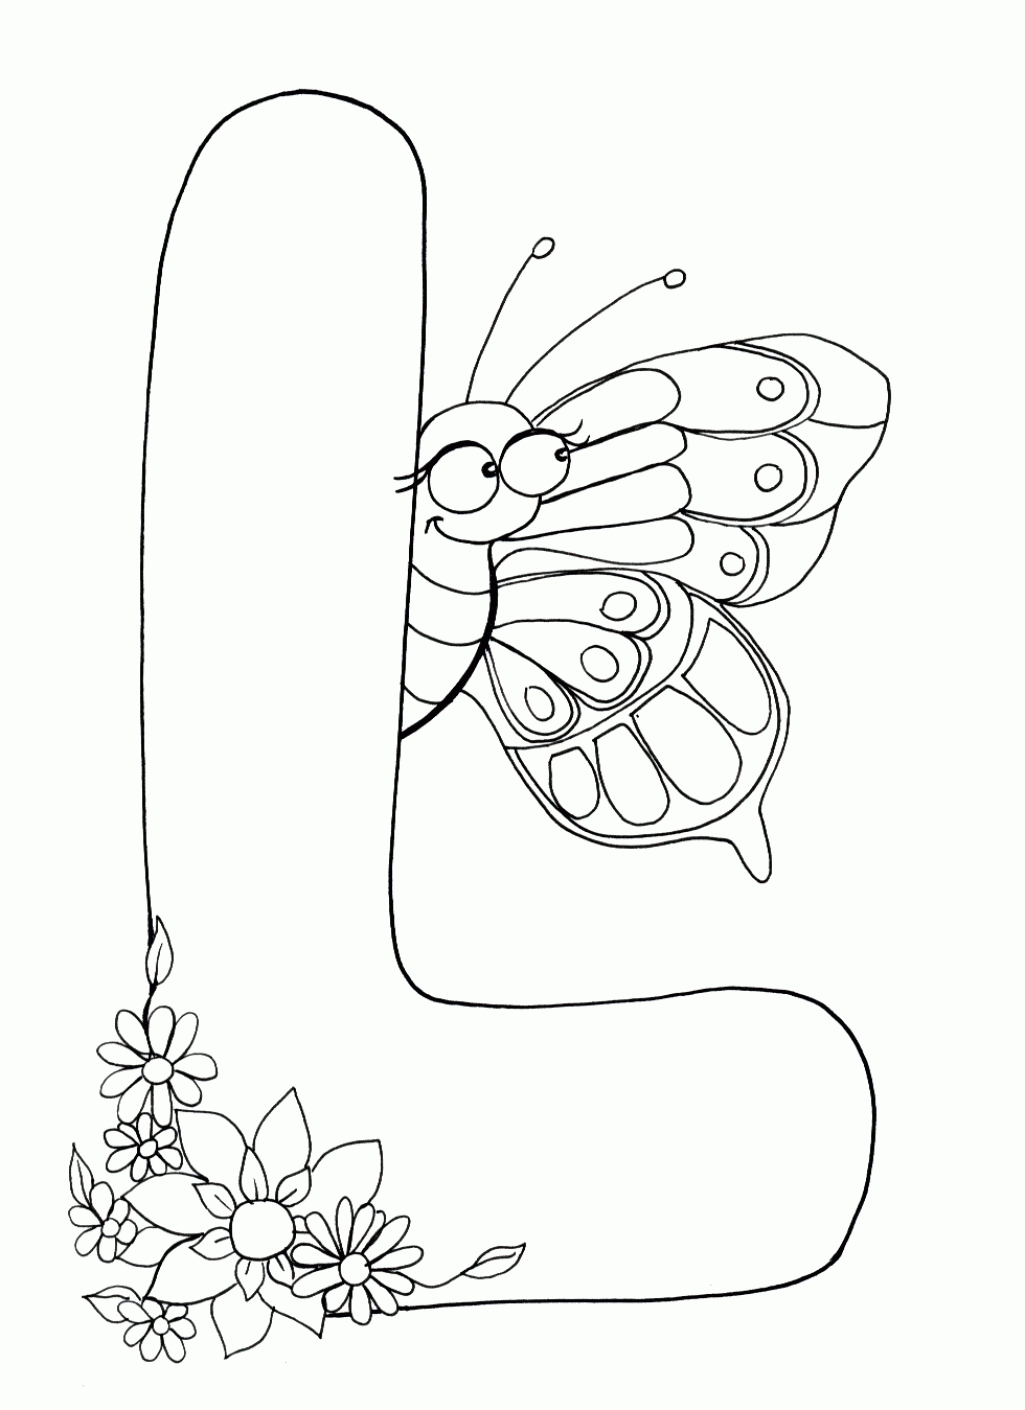 Free Coloring Pages Of Capital Bubble Letter L Alphabet Coloring ...